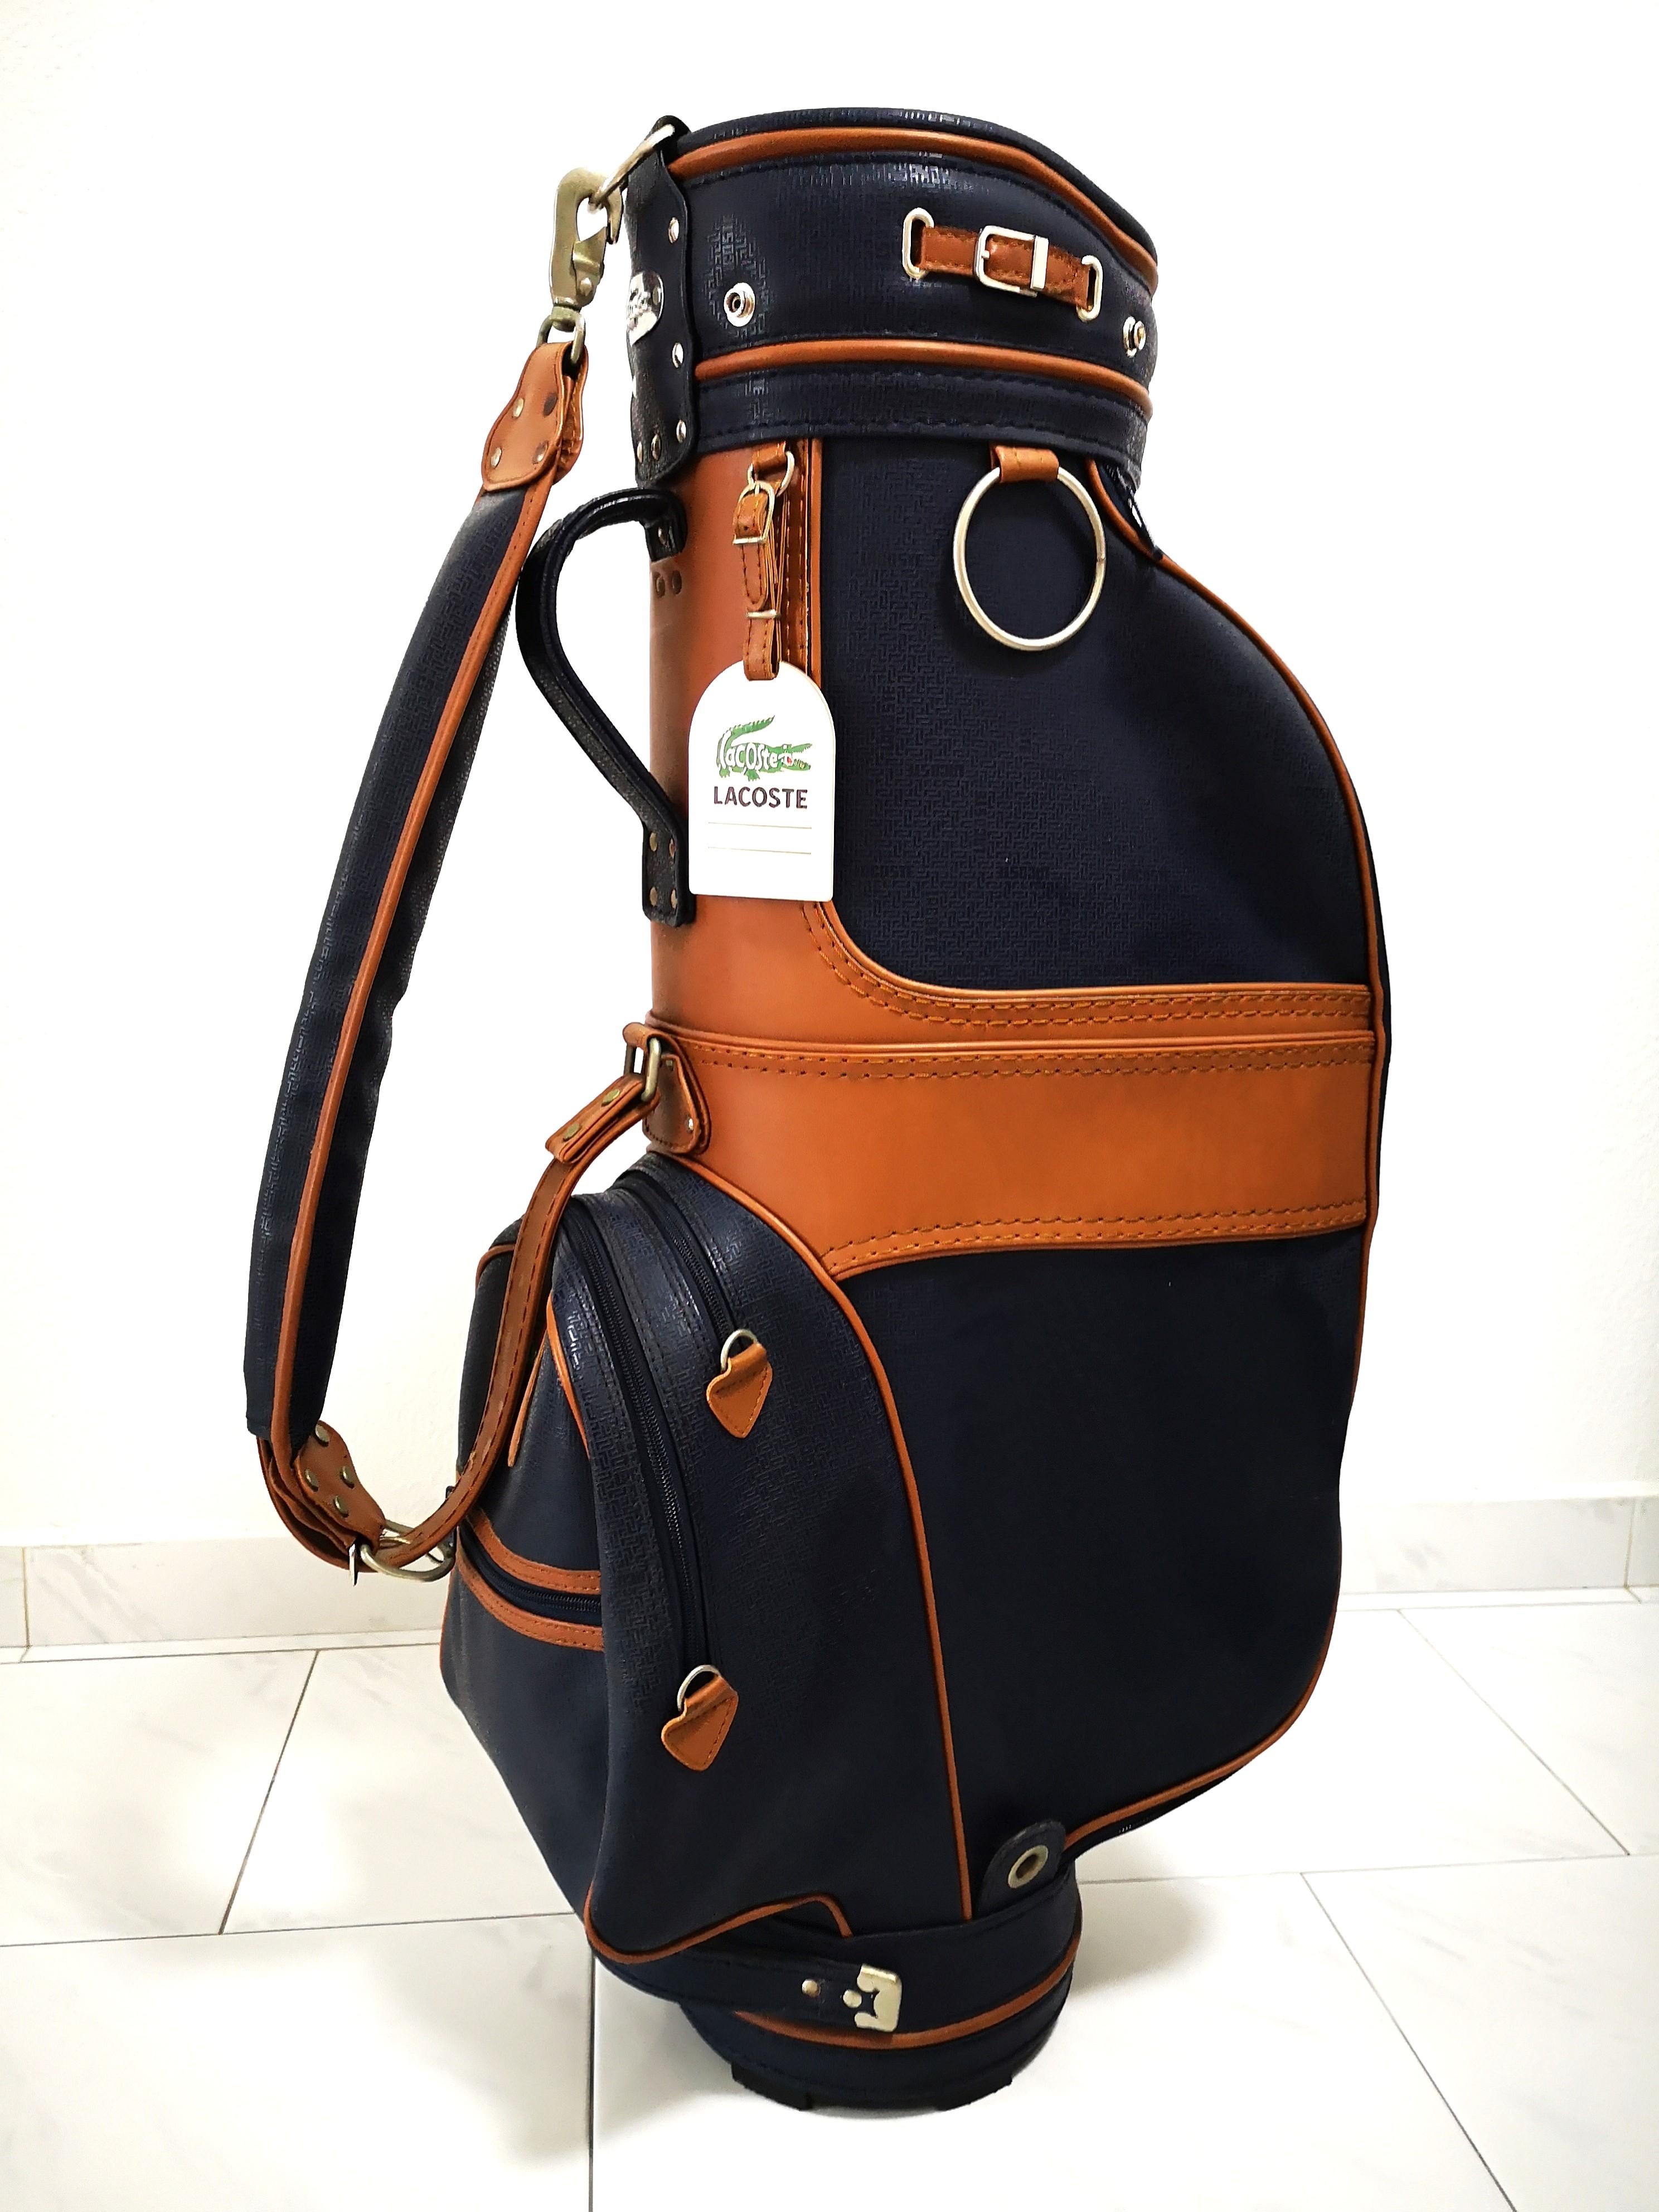 Lacoste Golf Bag As New, Sports, Sports 